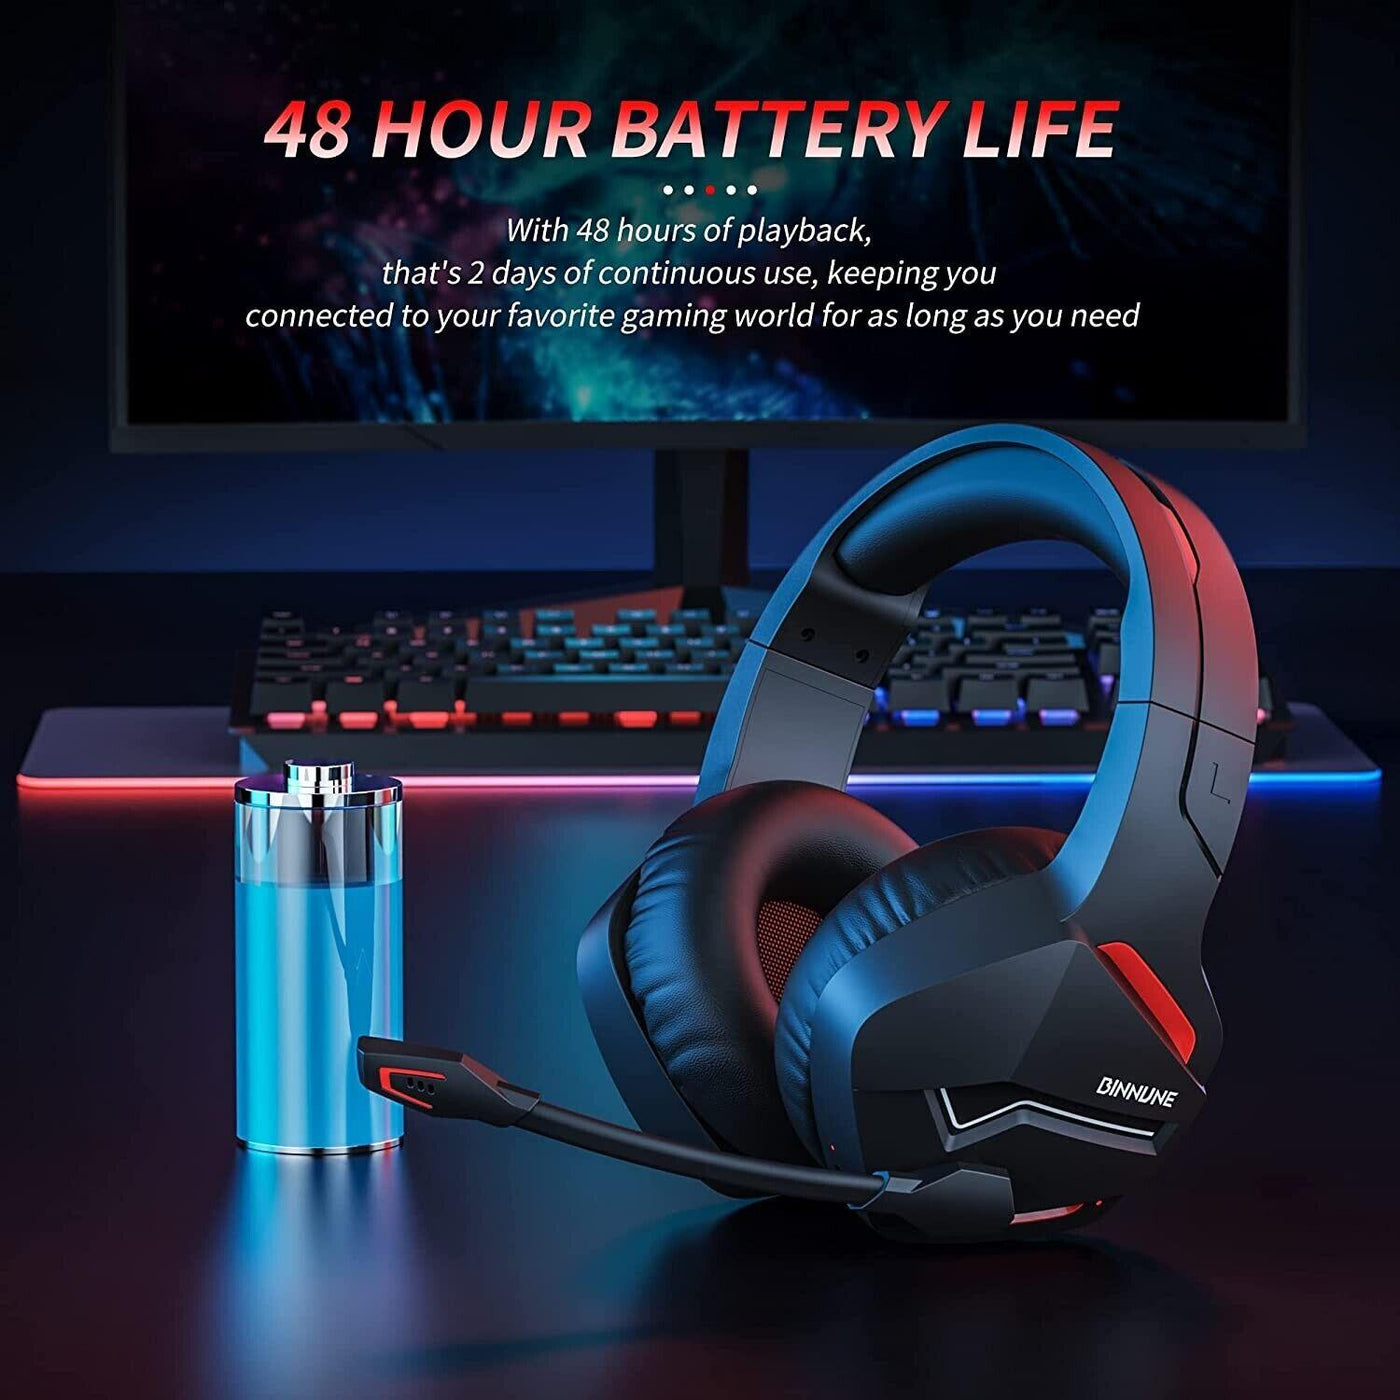 BINNUNE Wireless Gaming Headset with Microphone for PC PS4 PS5 - Massive Discounts